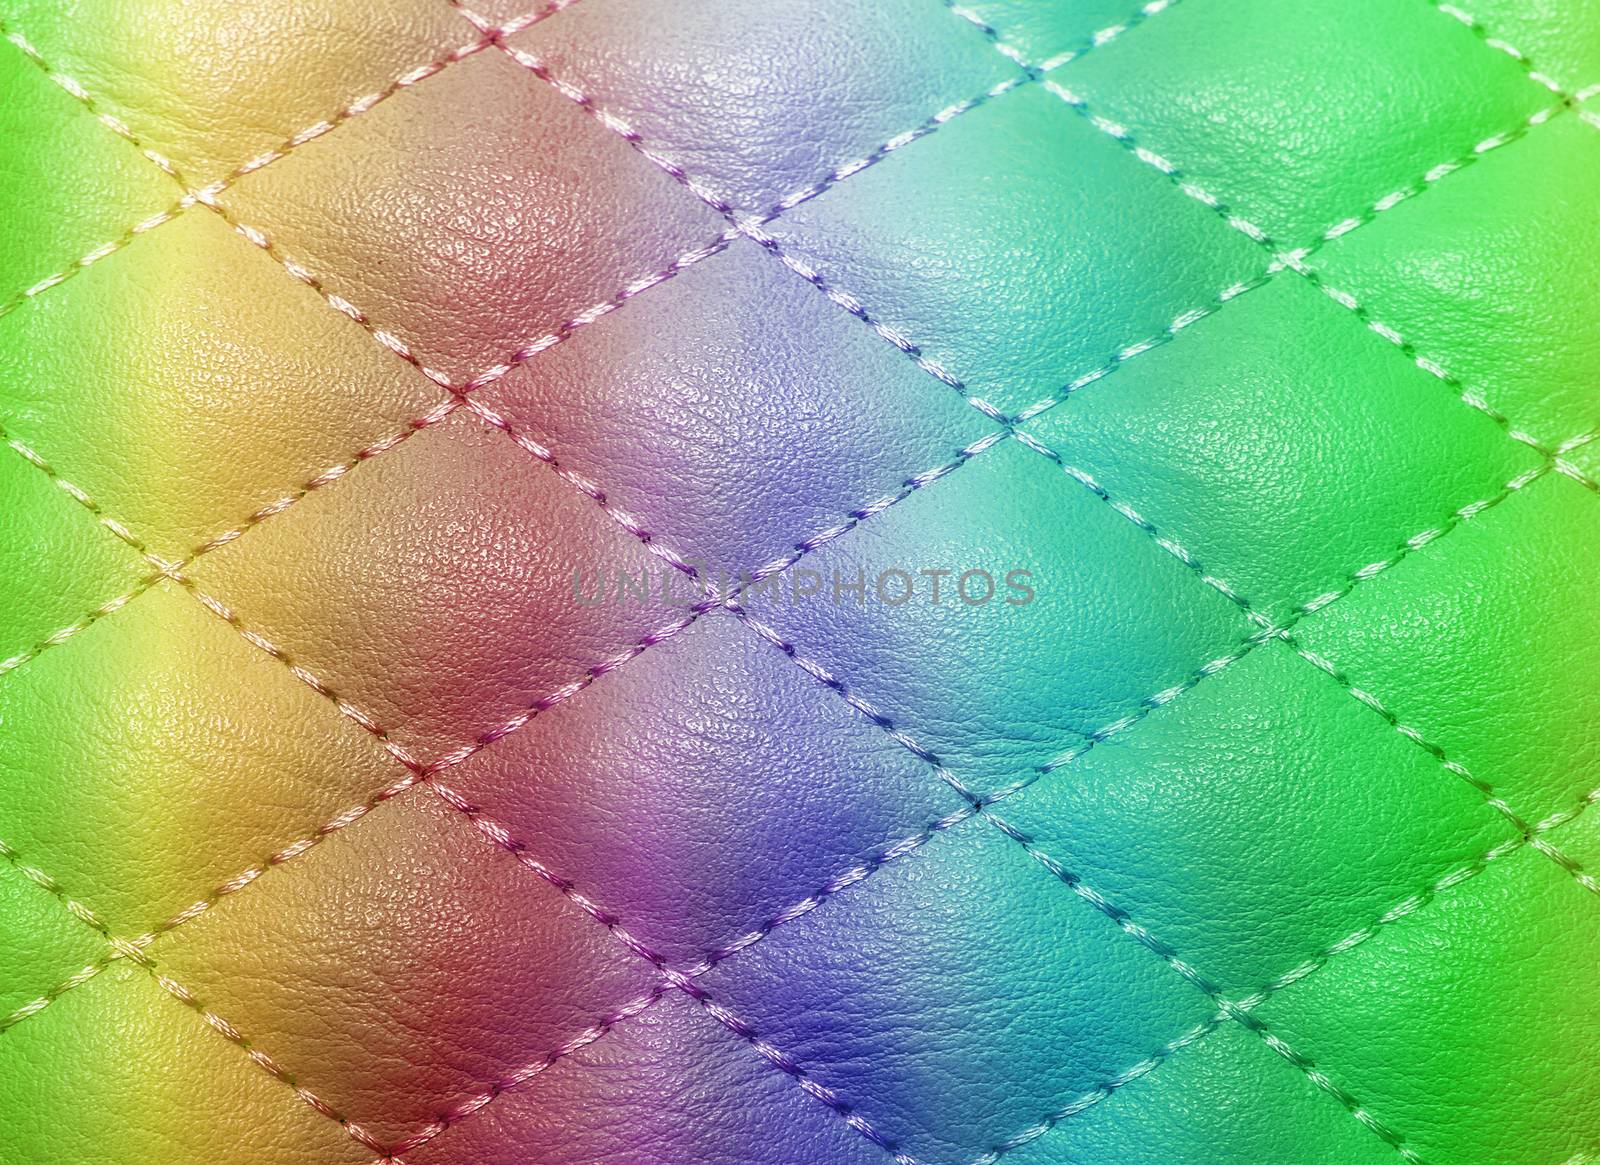 quilted texture artificial leather, color gradient, rainbow, stitched with thread for the background for texture